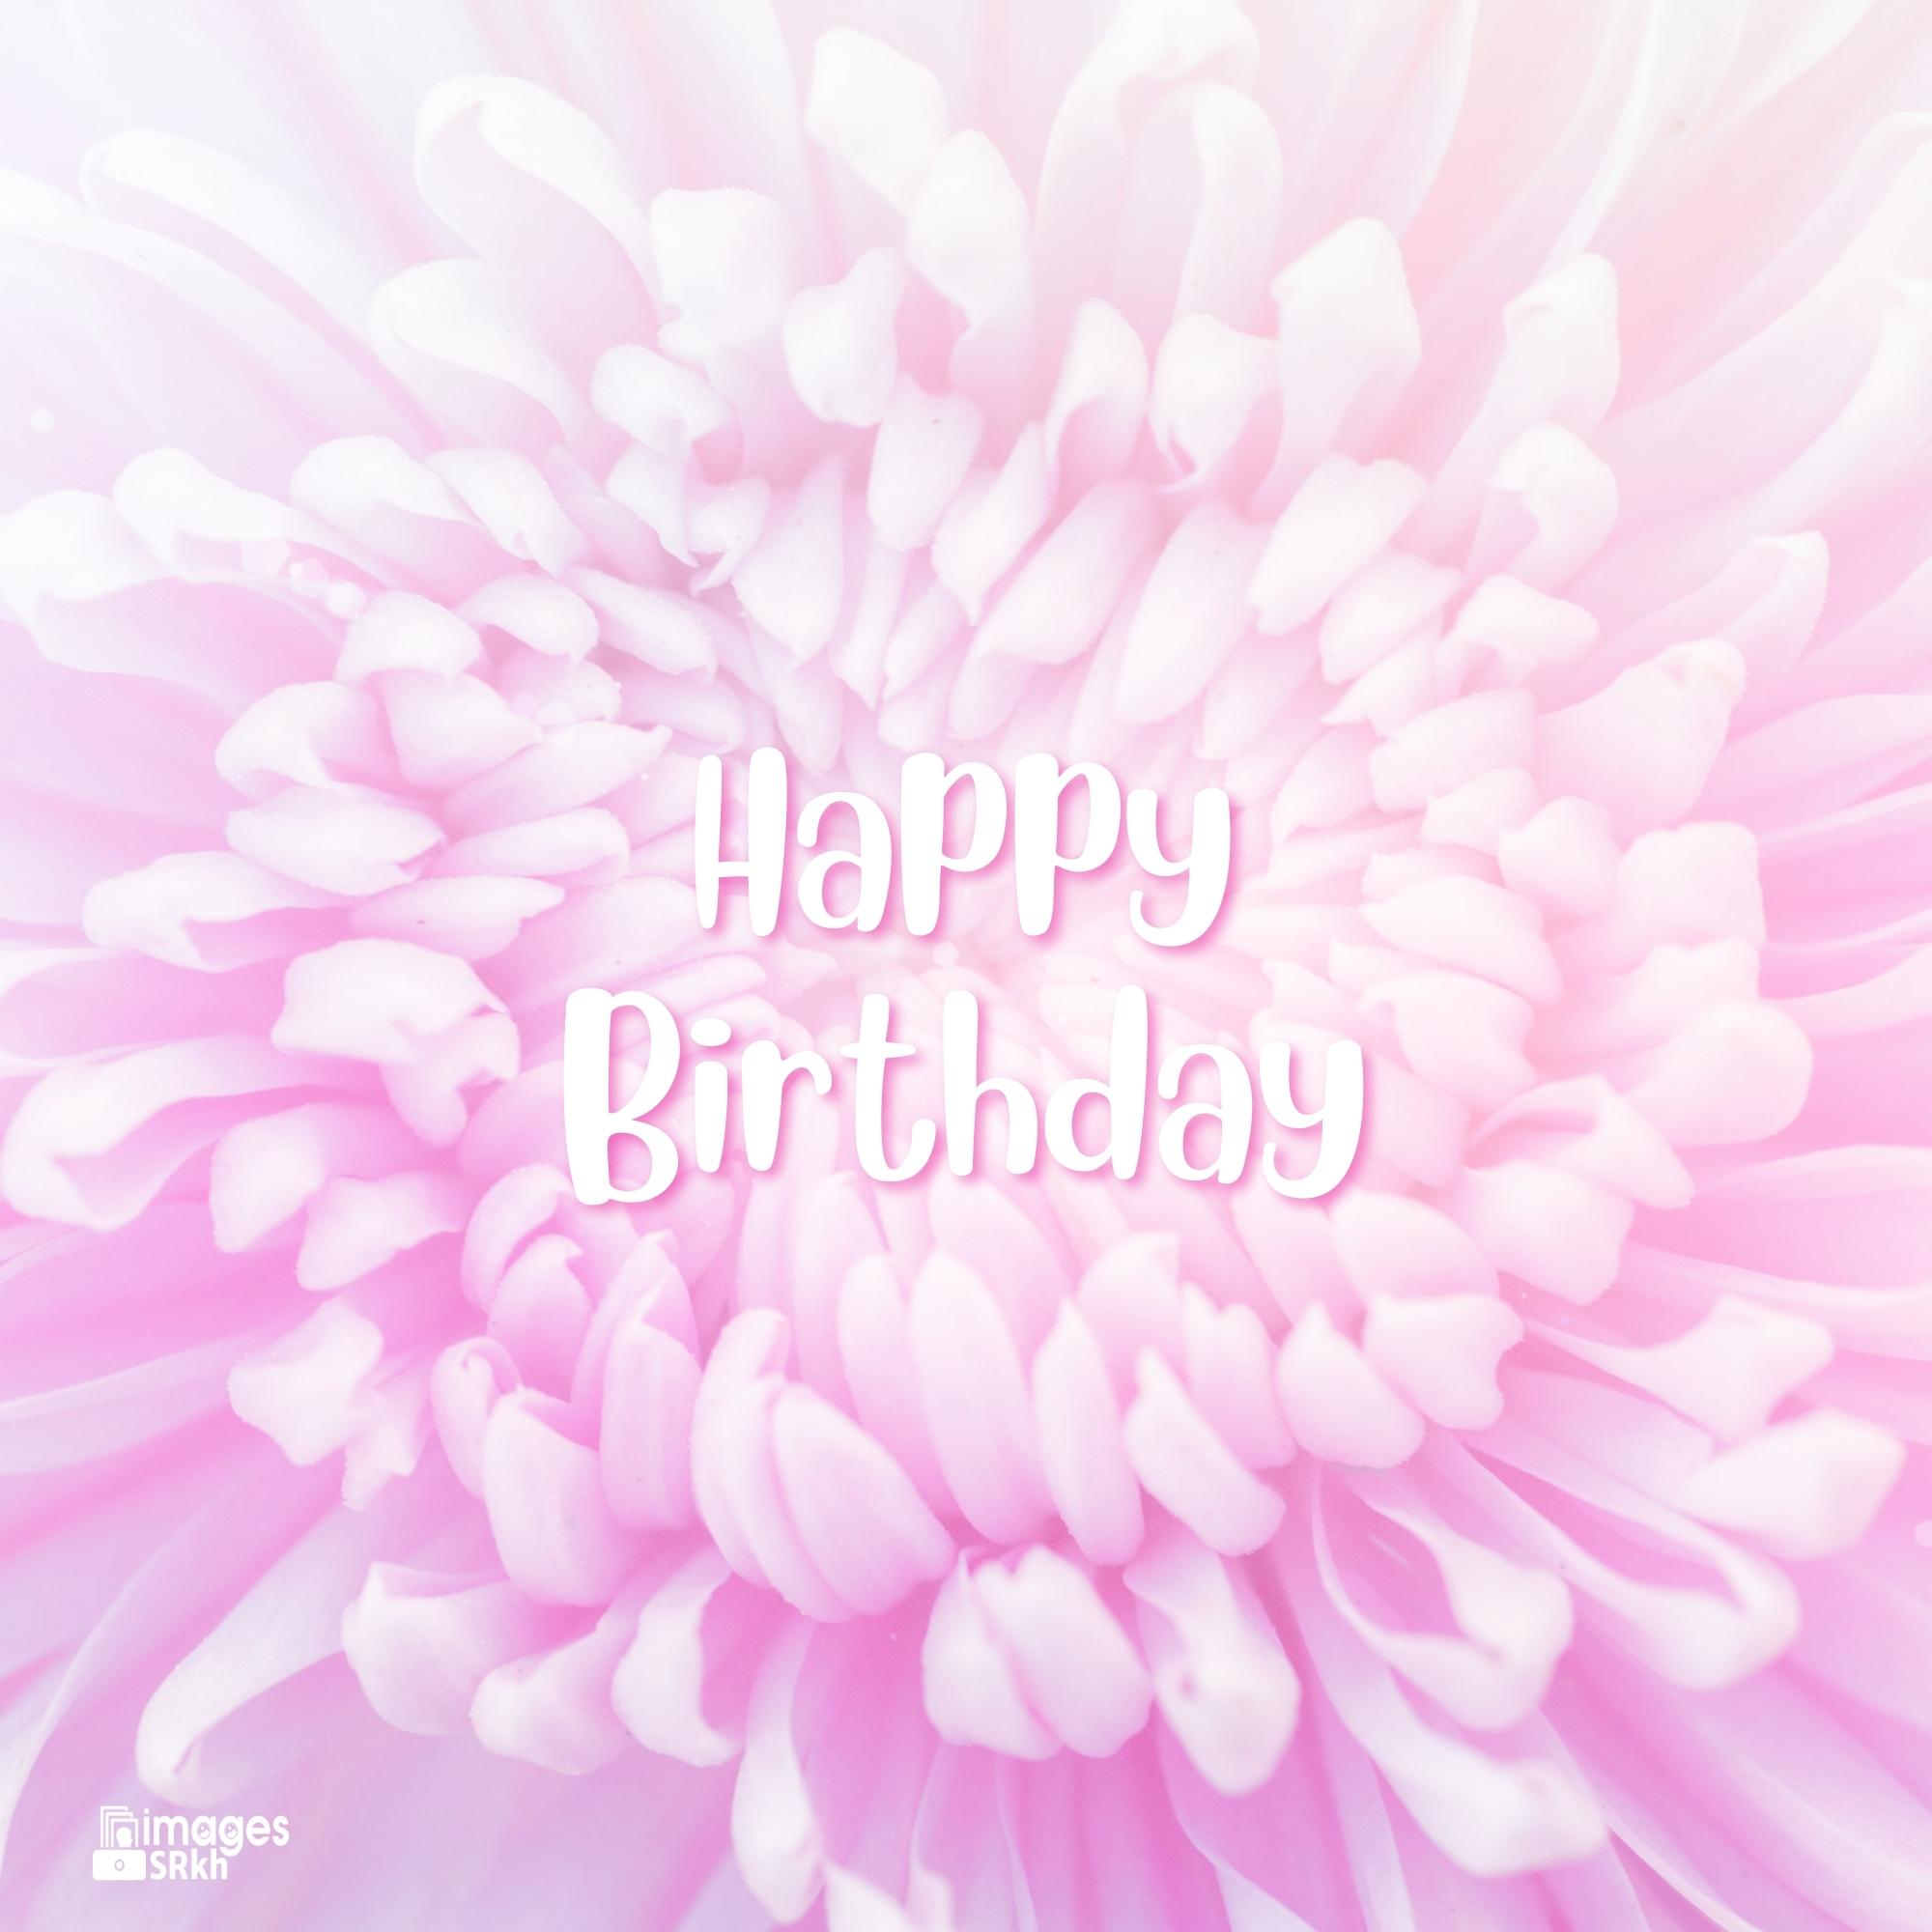 Happy Birthday Images Of Flowers Hd